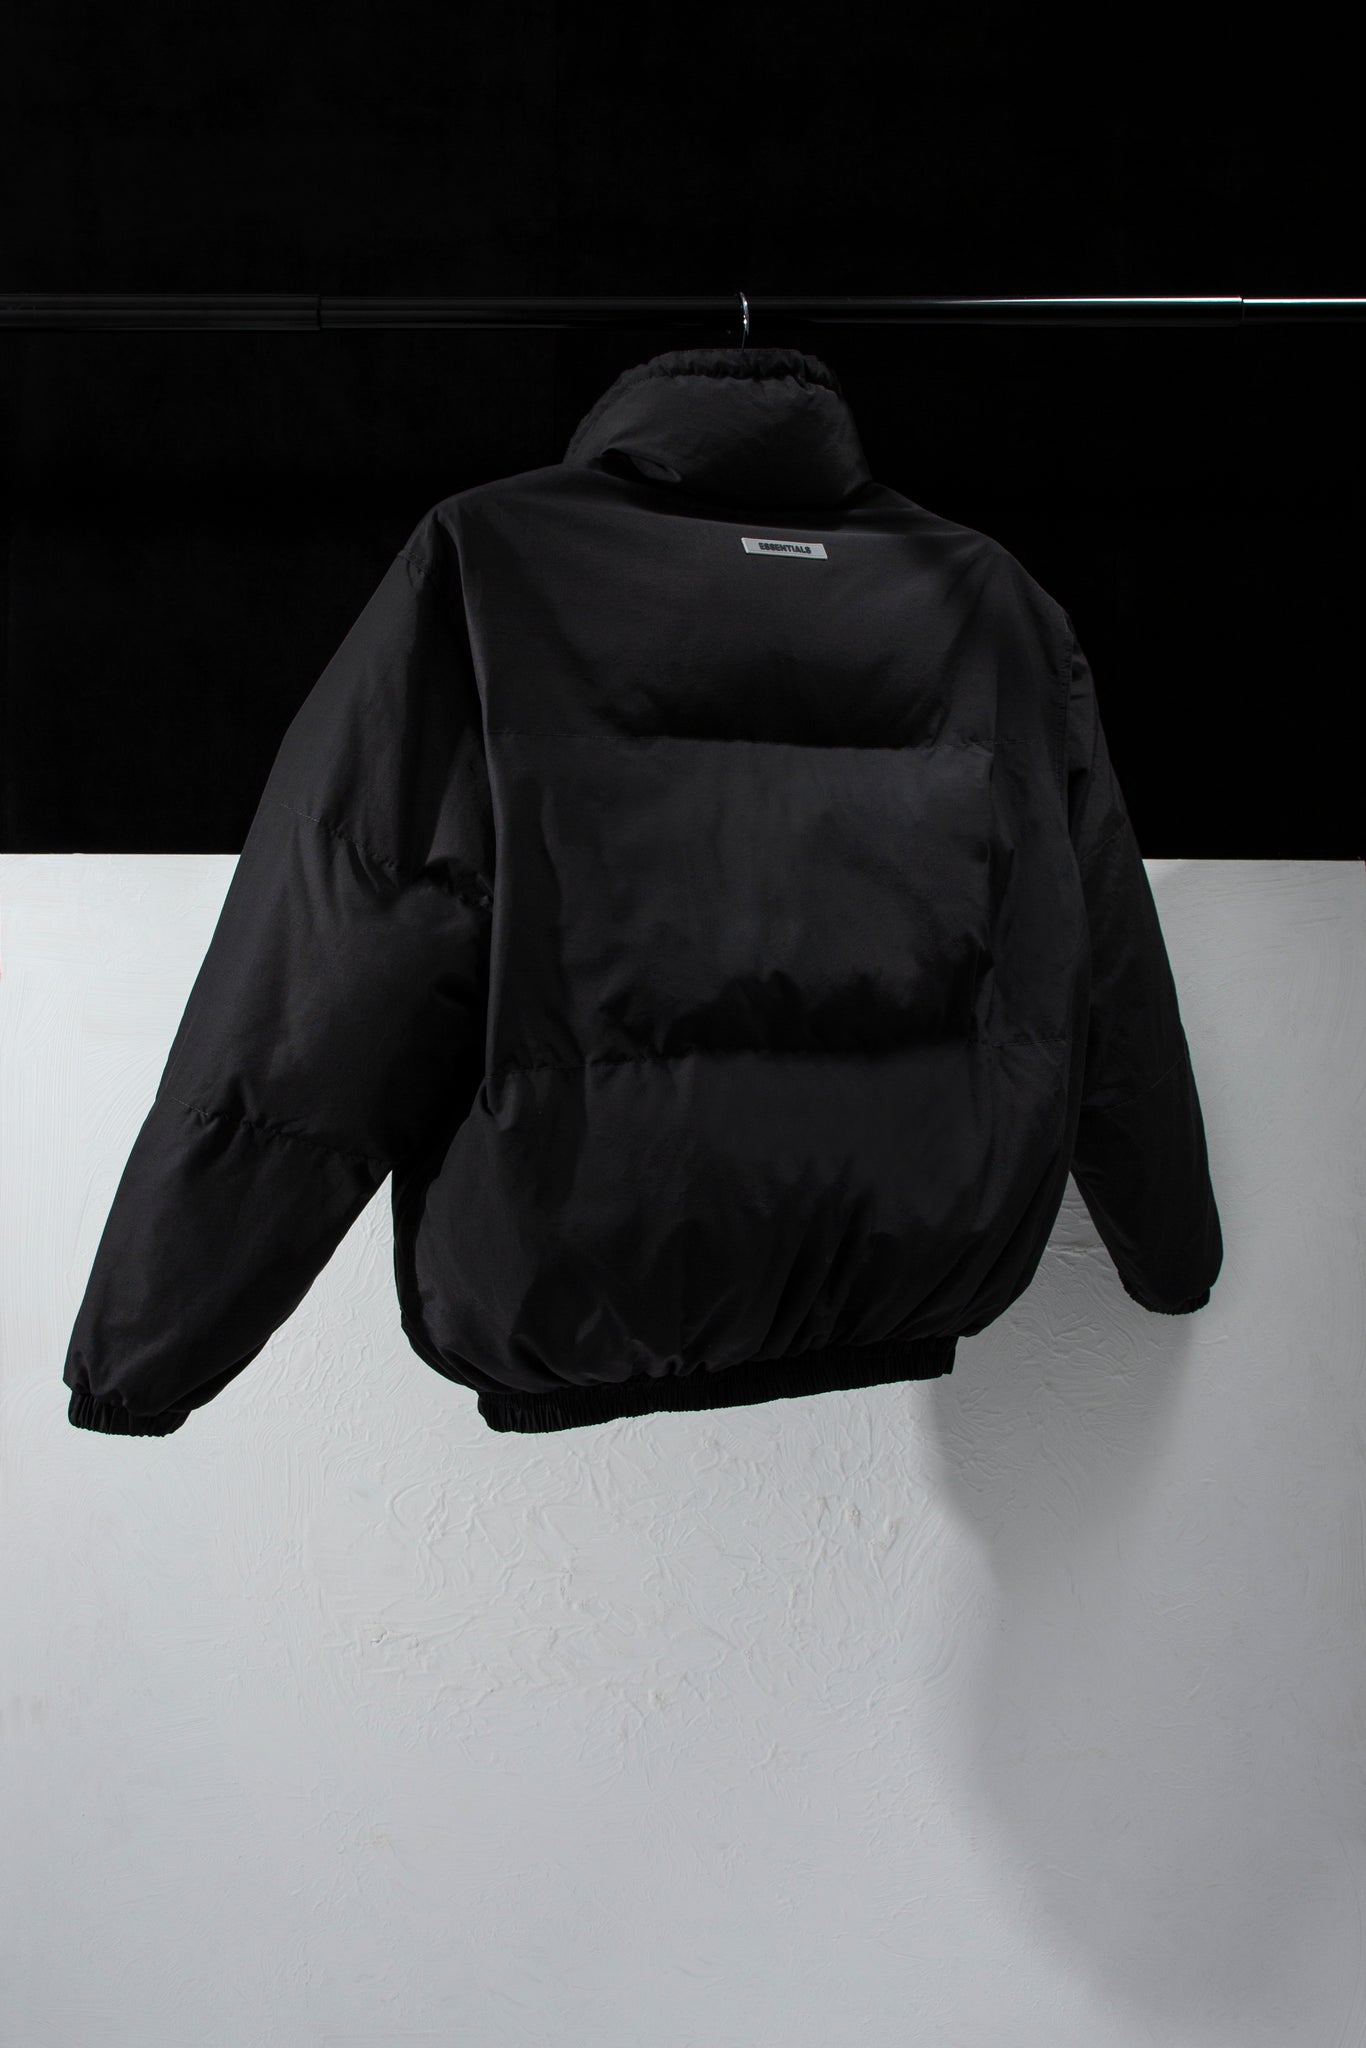 Fear of God ESSENTIALS First Drop Of 2021 at JUICE! – JUICESTORE